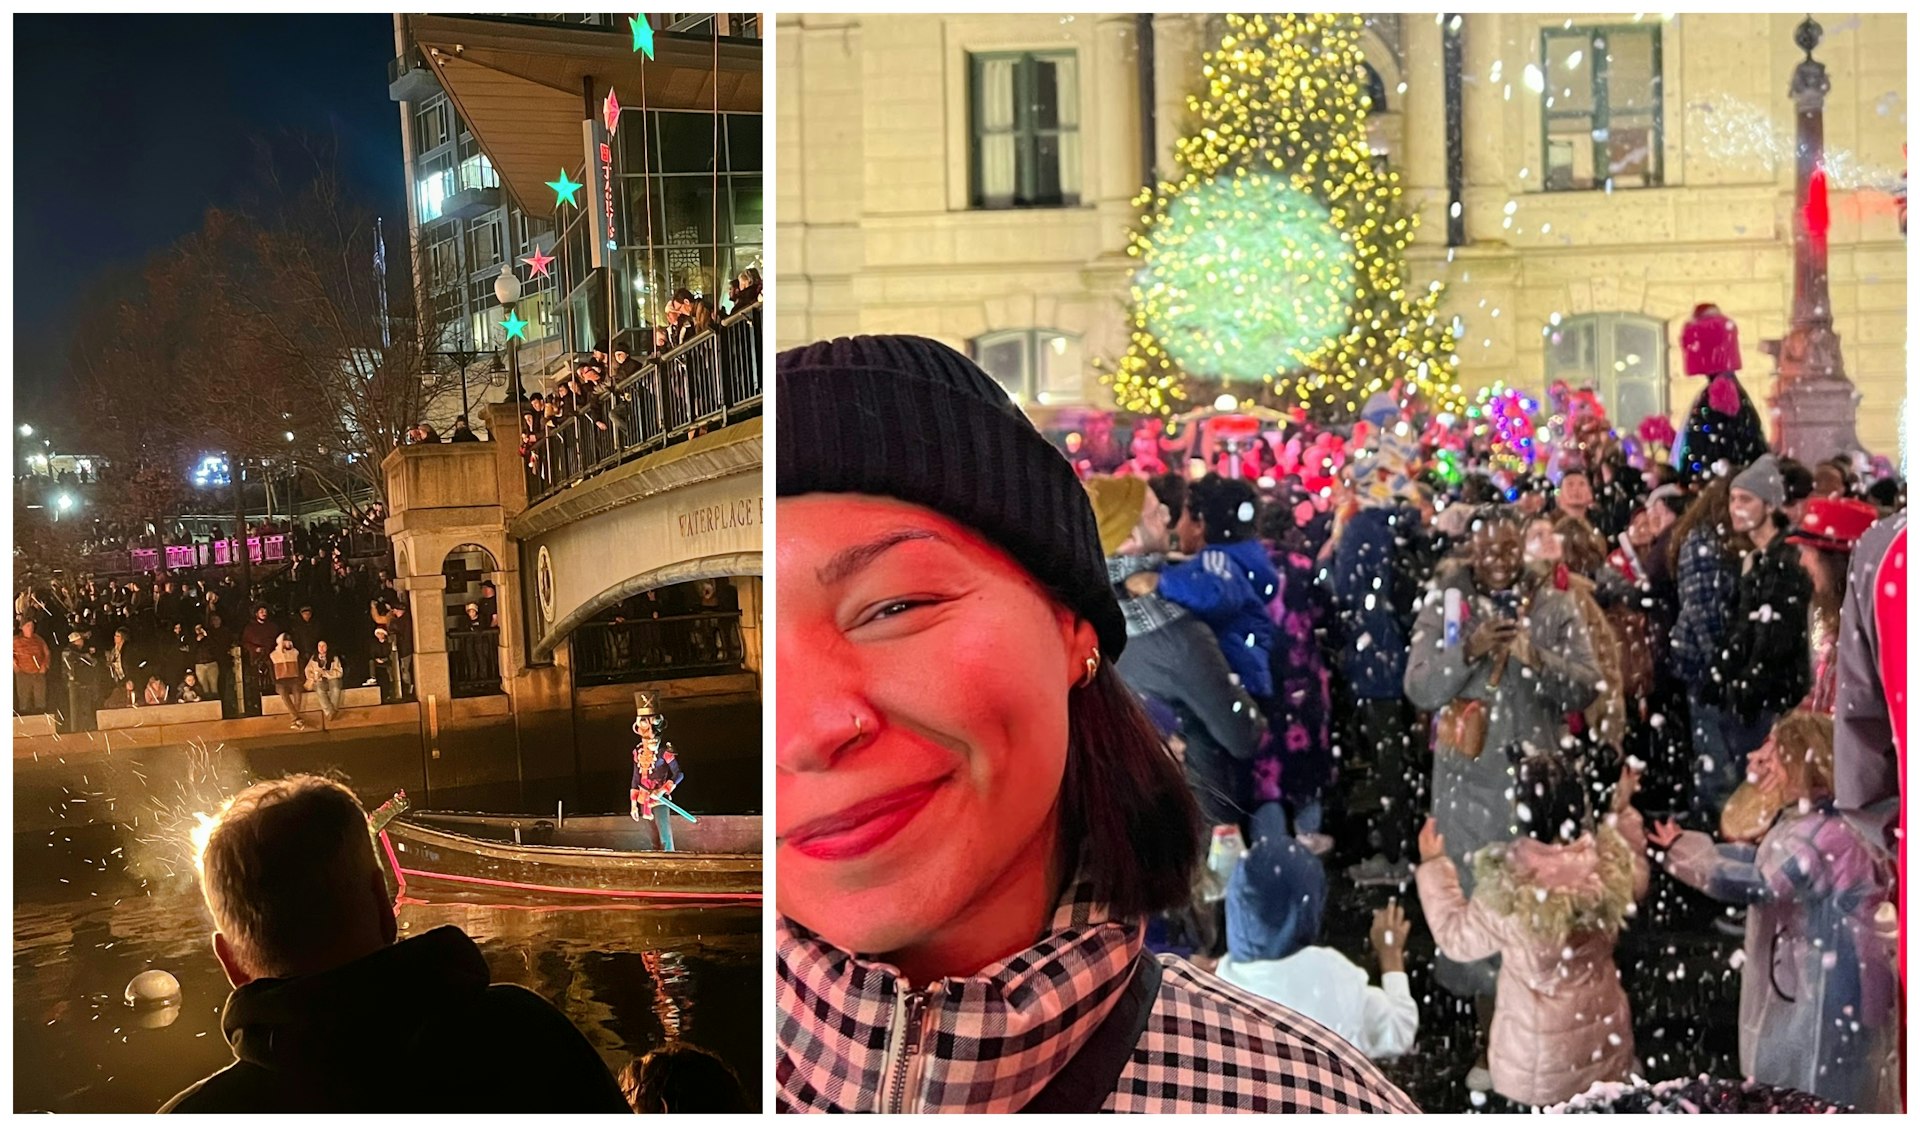 L: A Nutcracker performance on the river in Providence. R: A close-up of the writer Rachel in front of a Christmas tree